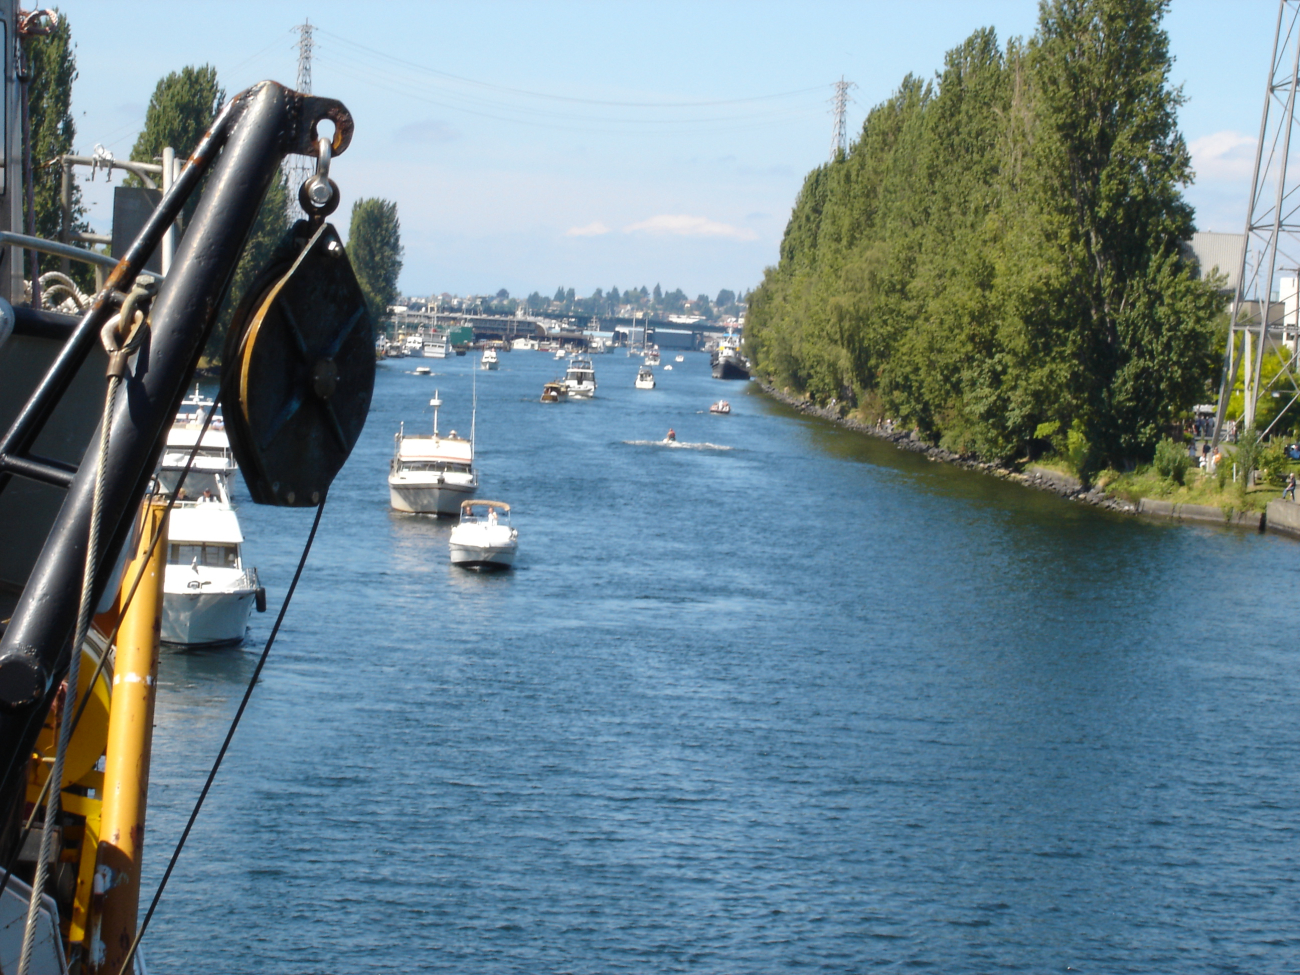 Looking astern from the MILLER FREEMAN while waiting for theFremont Avenue Bridge to open